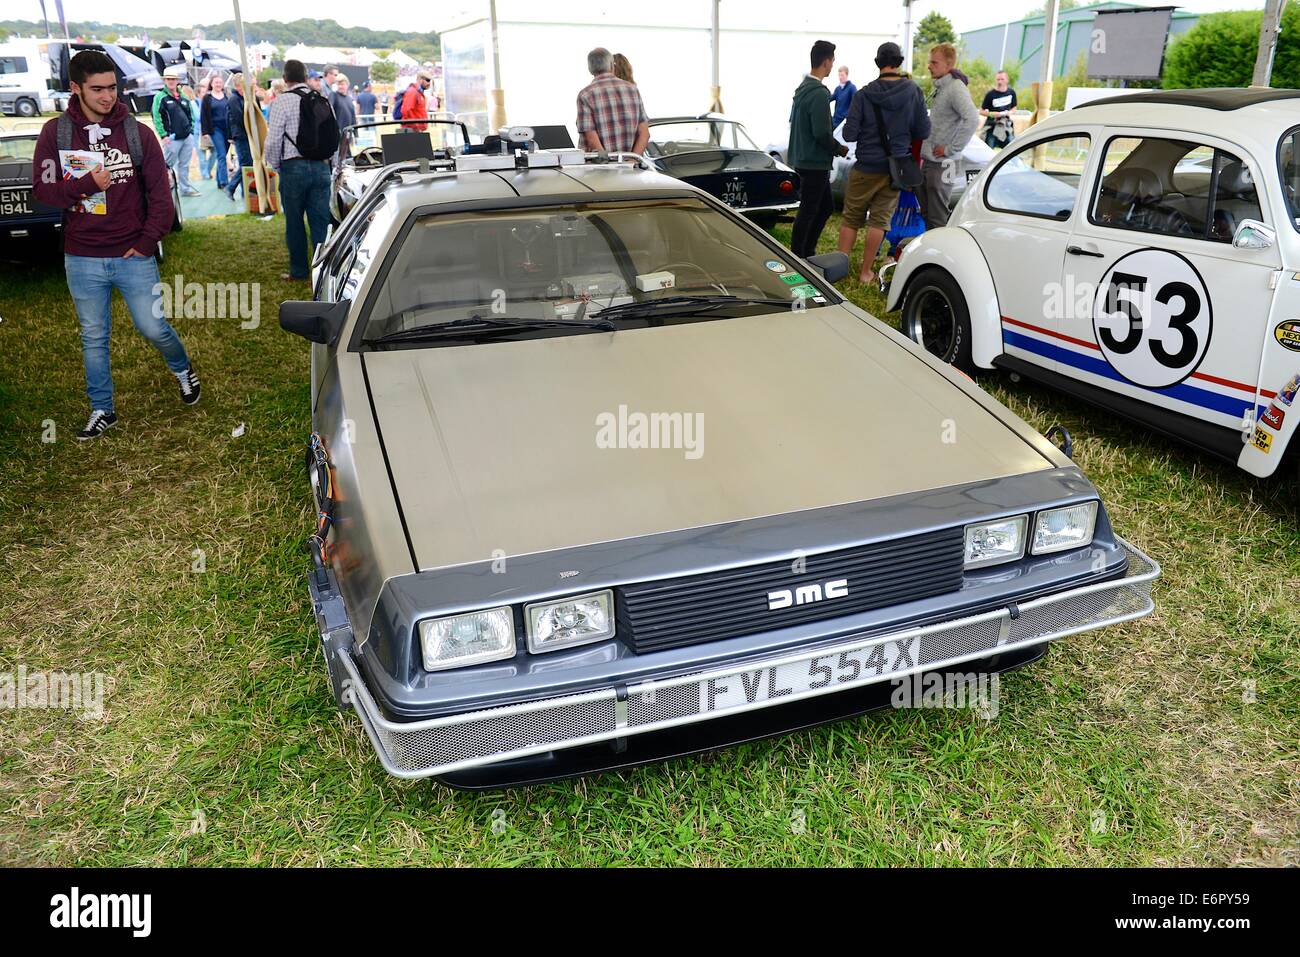 The Back to the Future DeLorean DMC12 time machine at Chris Evans' CarFest South in aid of Children In Need Stock Photo